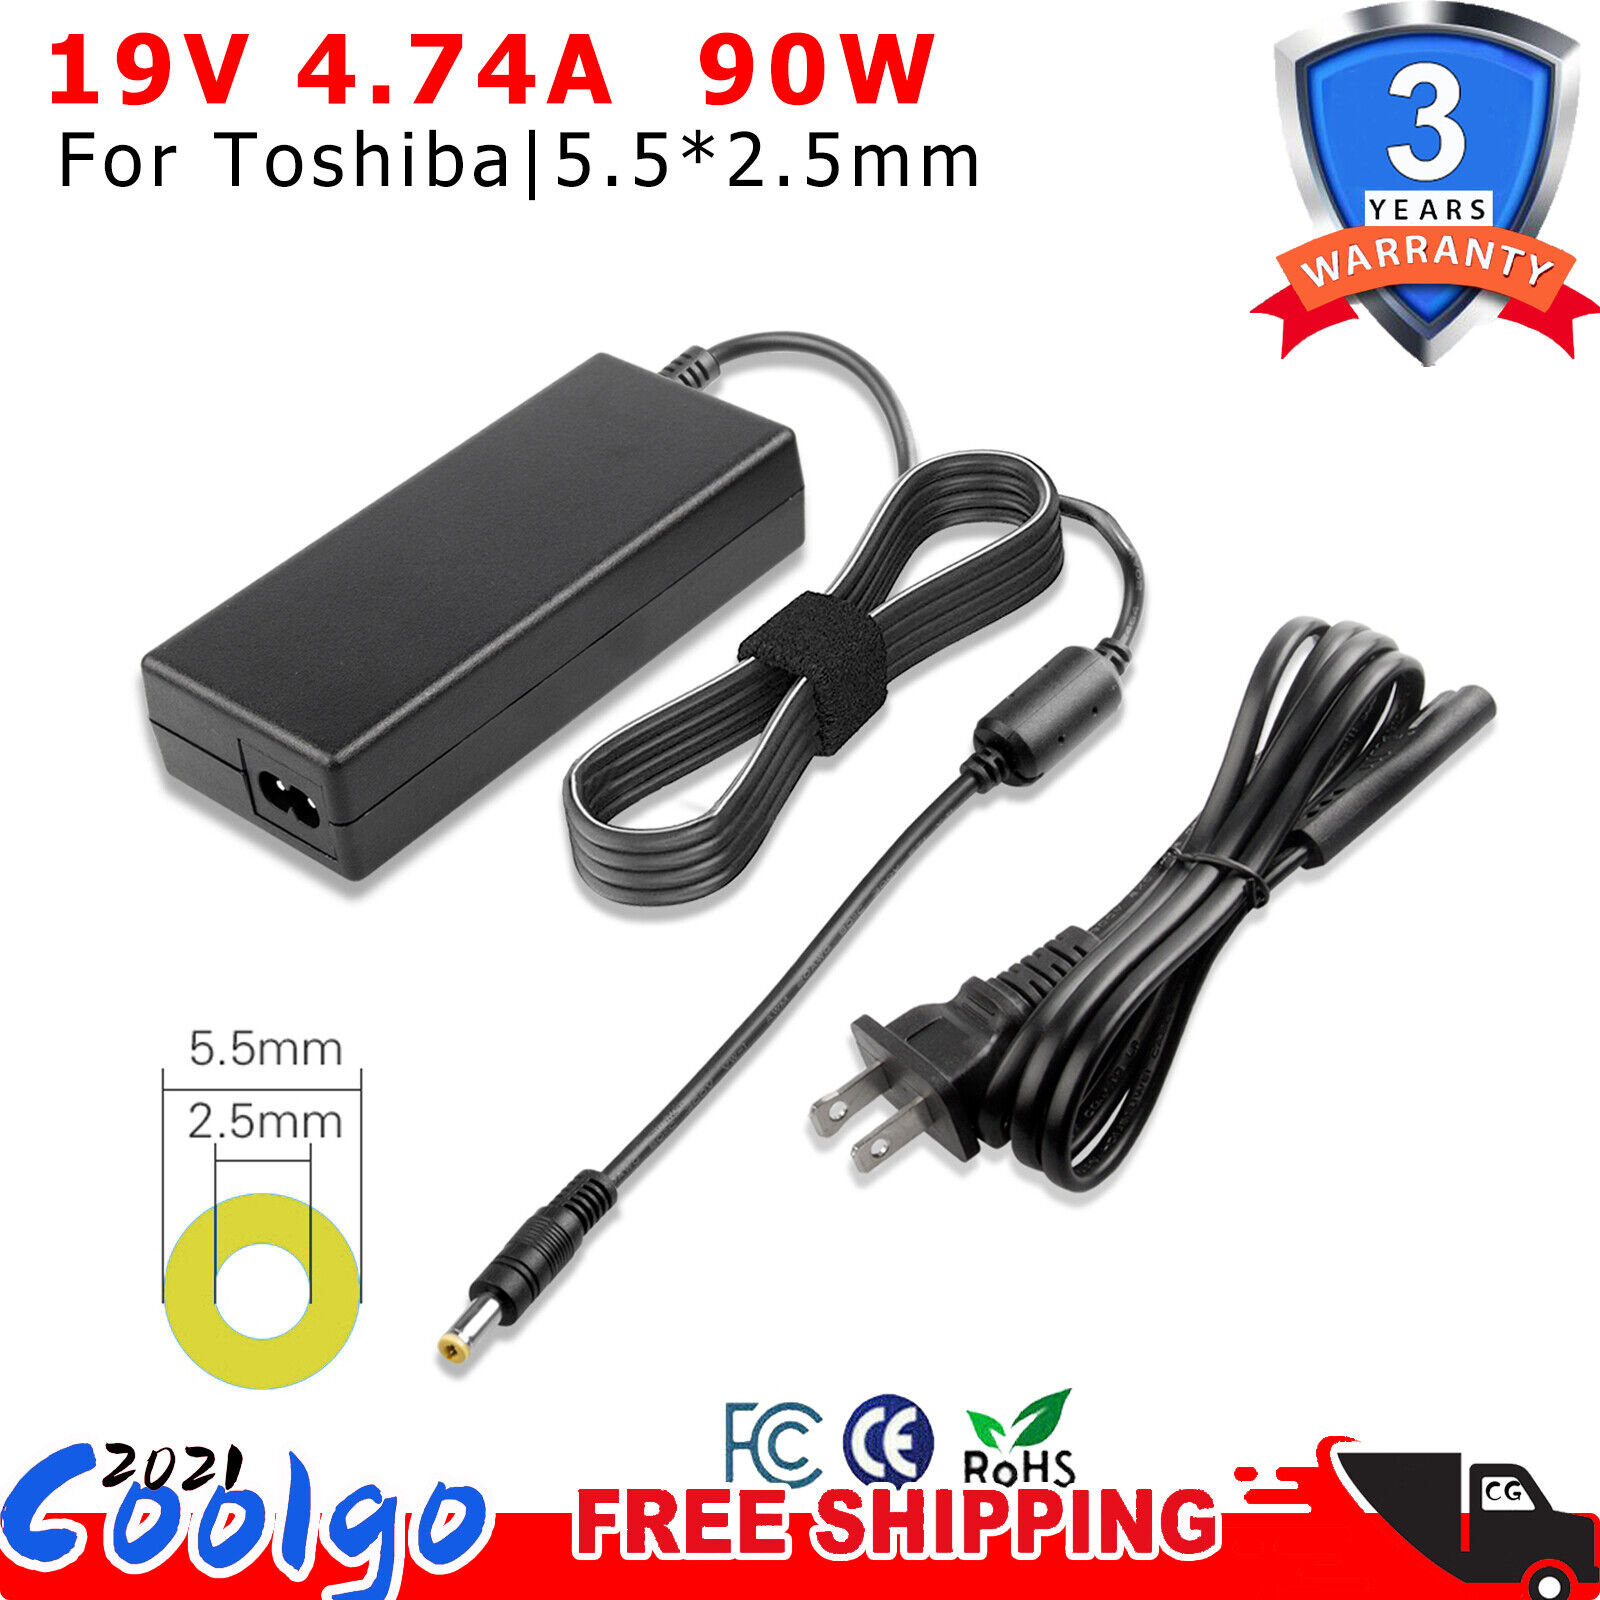 AC Adapter Charger for Toshiba Satellite e205-s1904 l305-s5907 p775-s7100